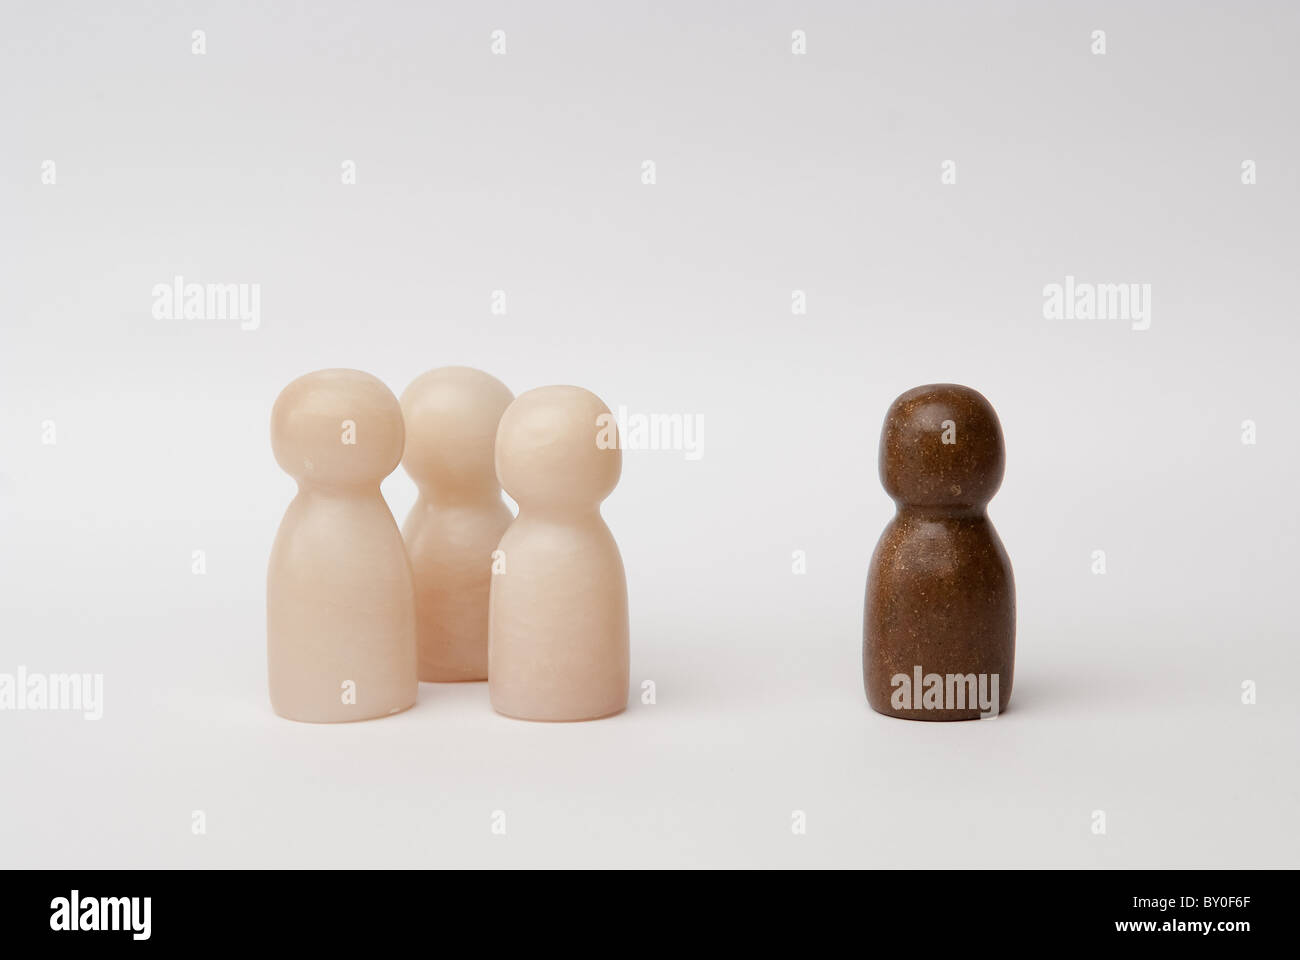 A group of 3 white figures and 1 brown figure, standing seperate Stock Photo